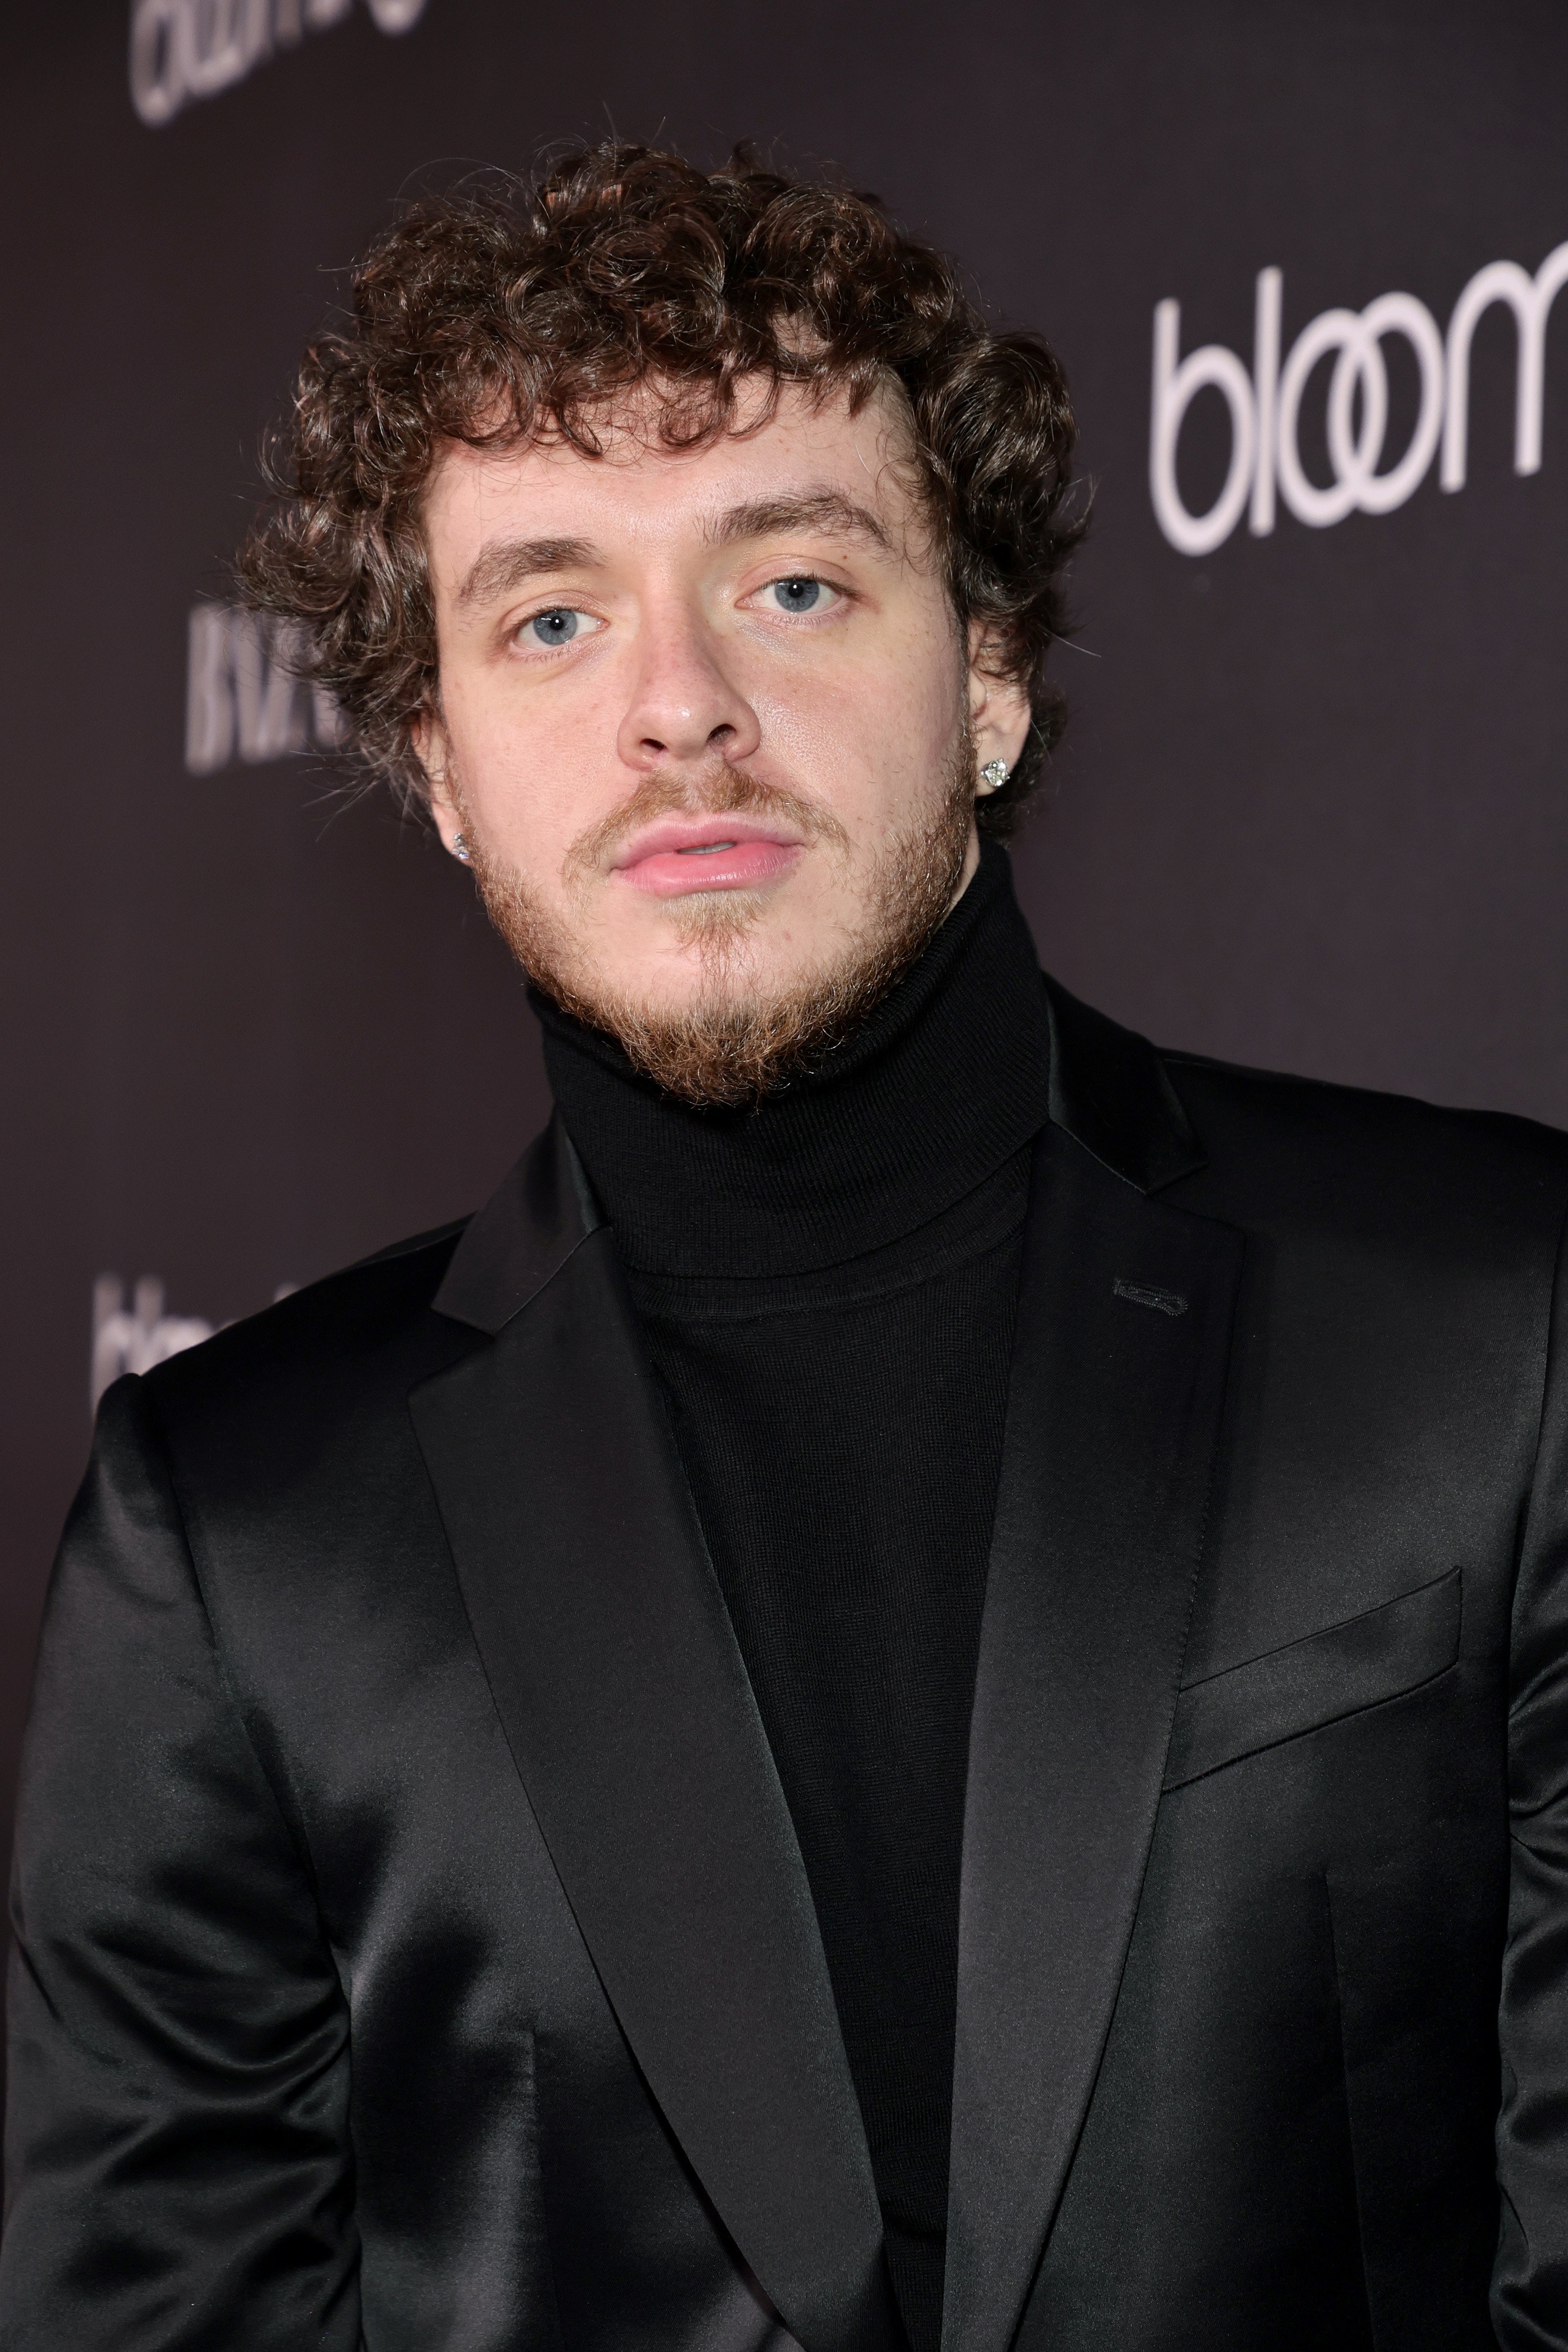 Jack Harlow at Bloomingdale's on September 09, 2022, in New York City. | Source: Getty Images